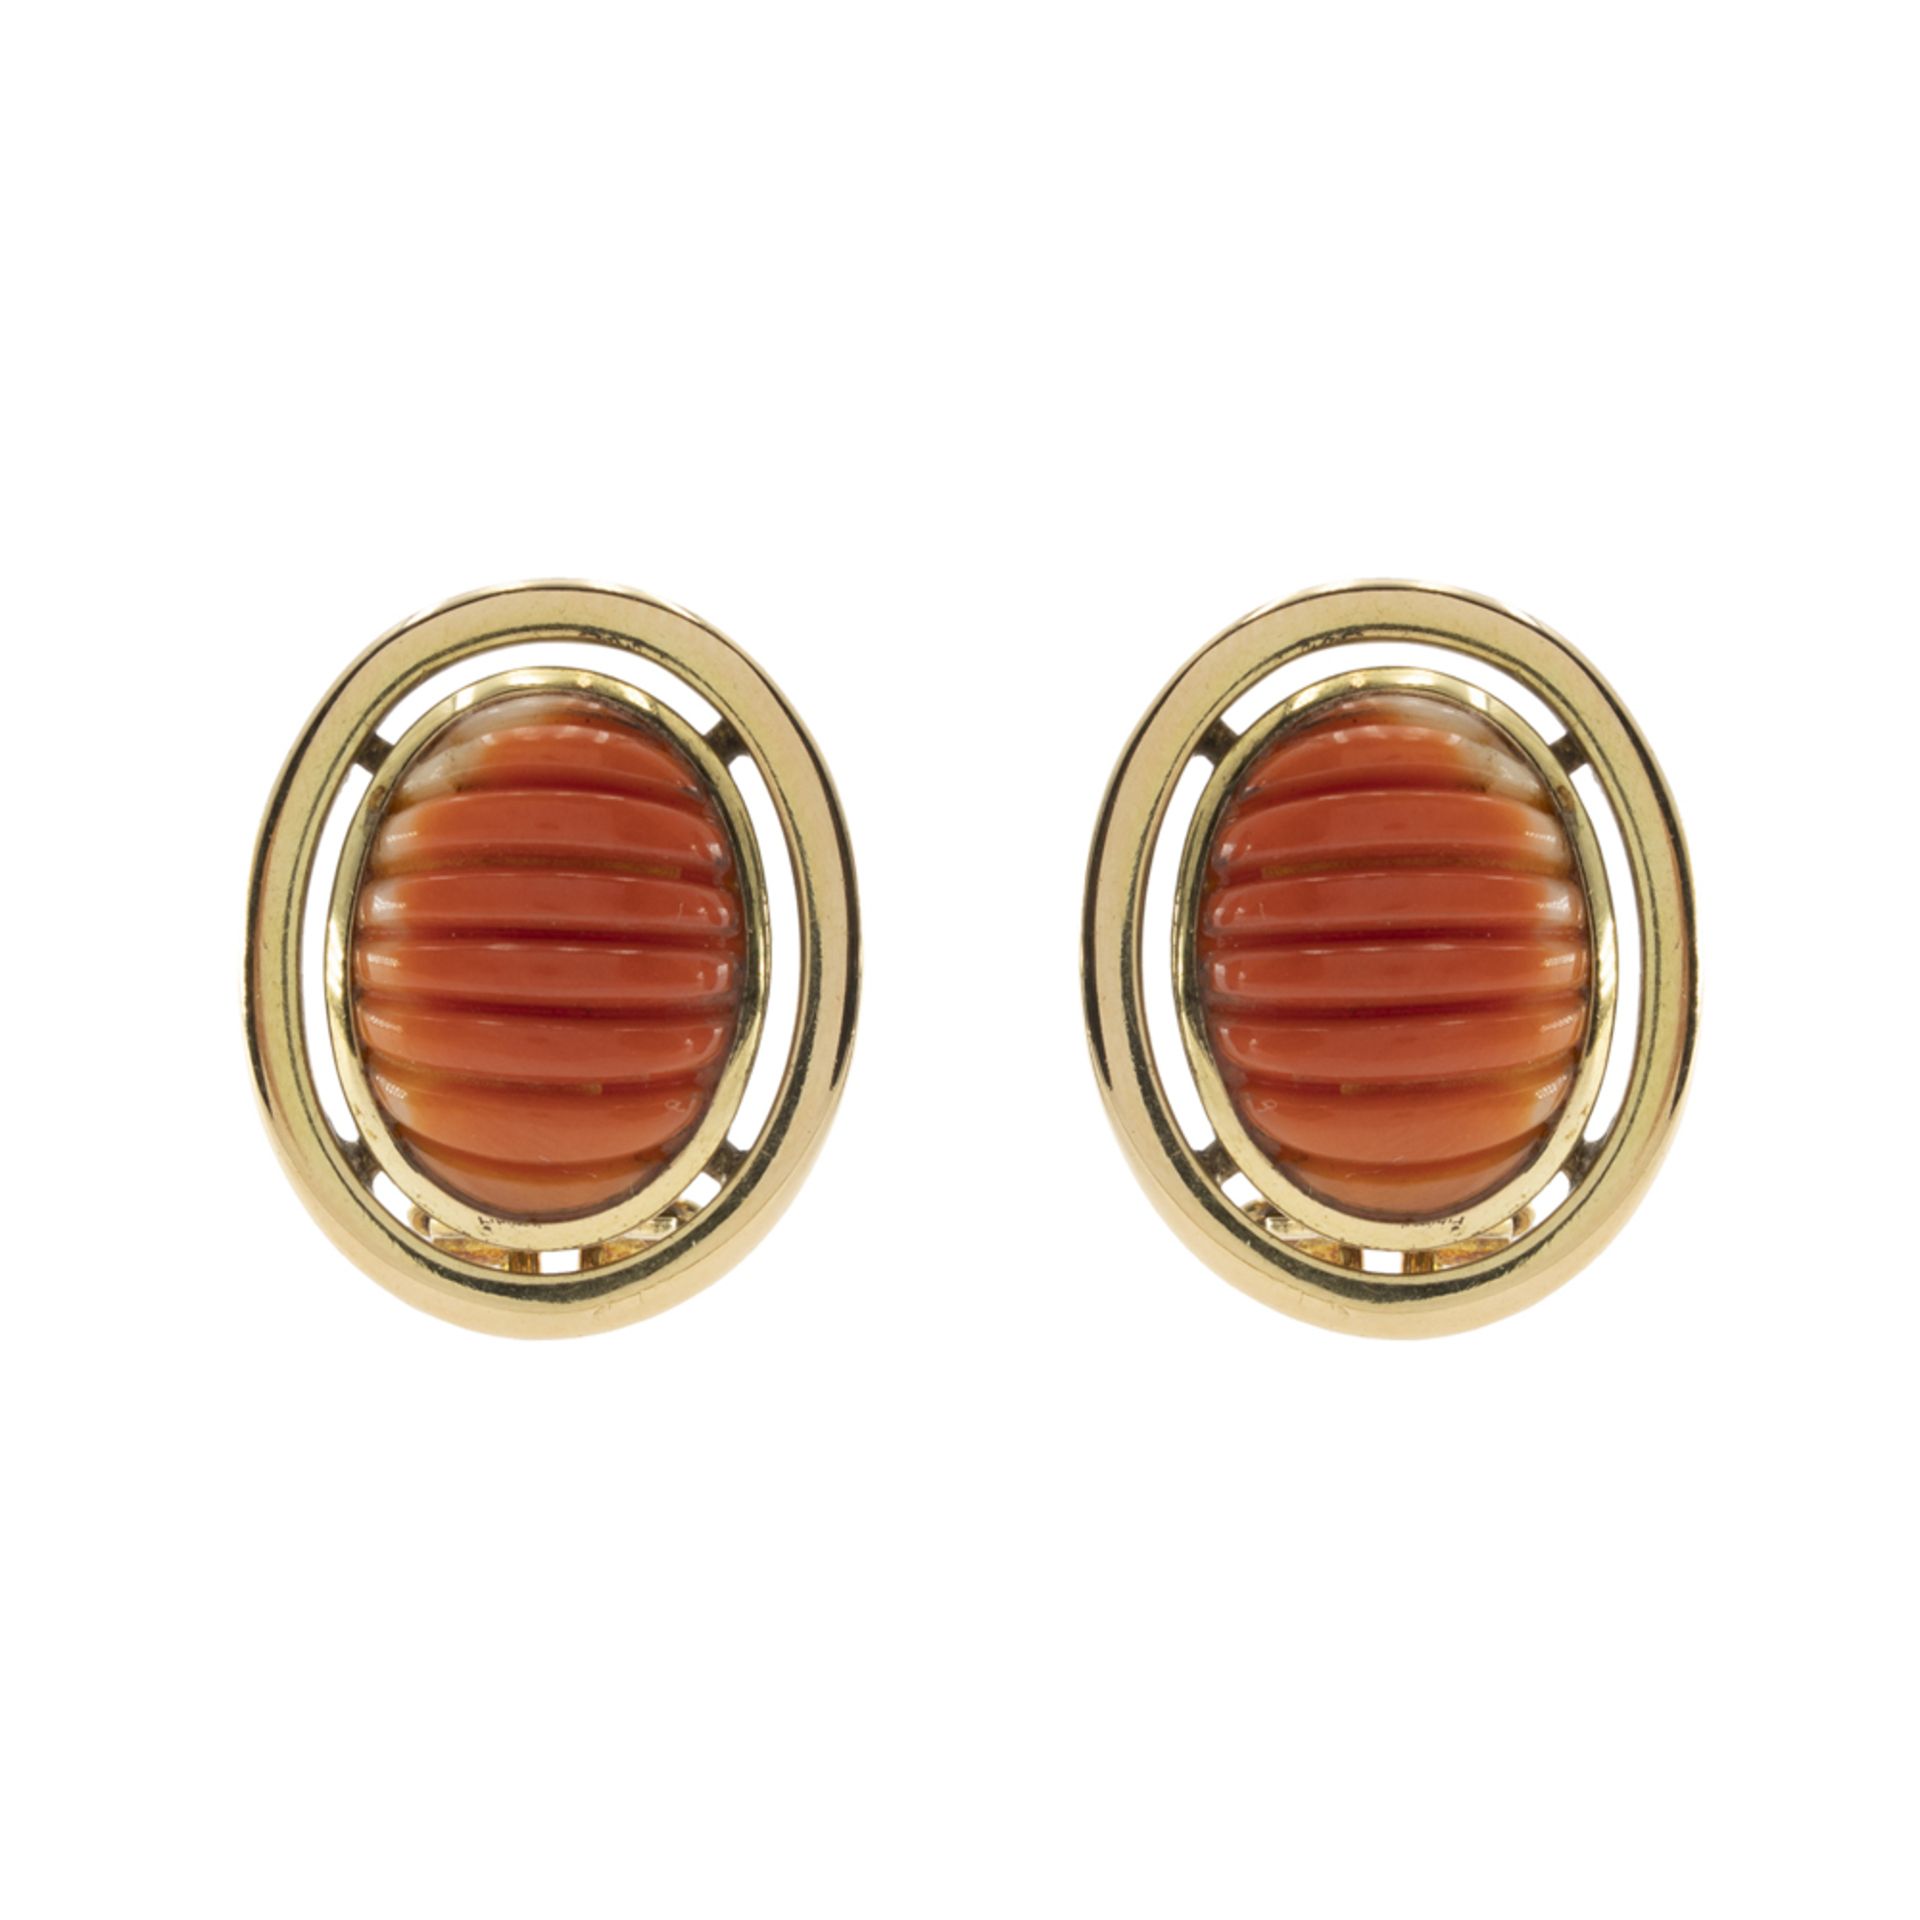 18kt yellow gold and coral lobe earrings